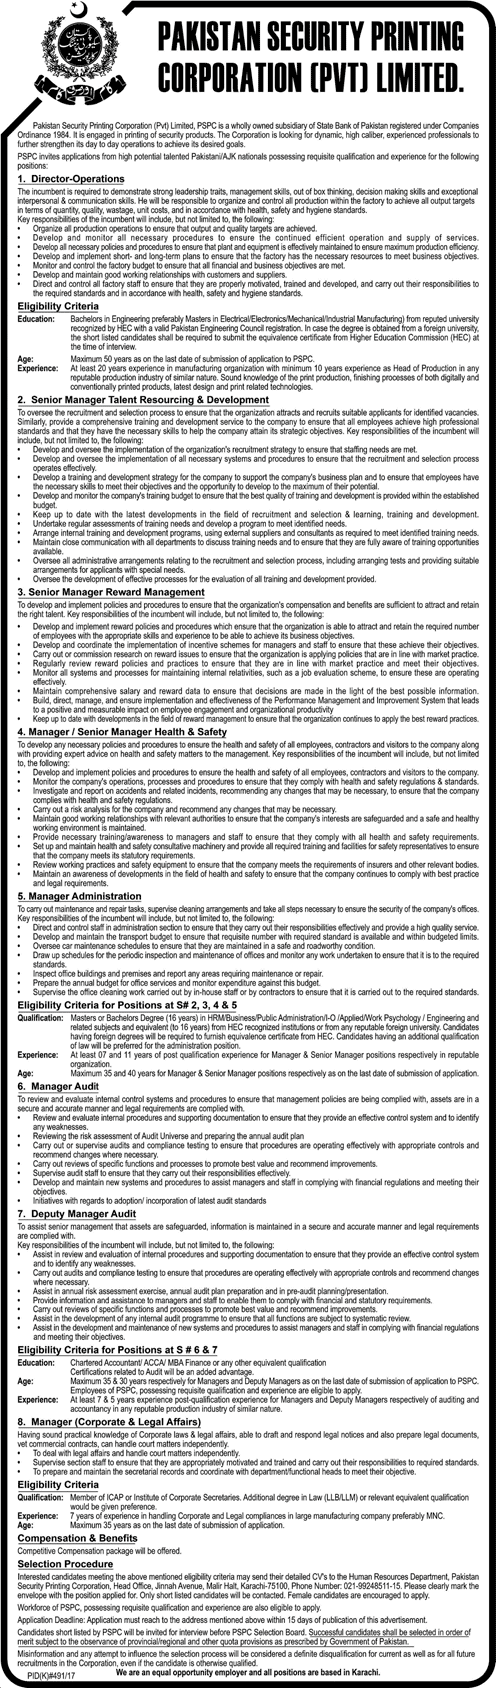 Pakistan Security Printing Corporation Jobs 2017 August Managers & Operations Director Latest